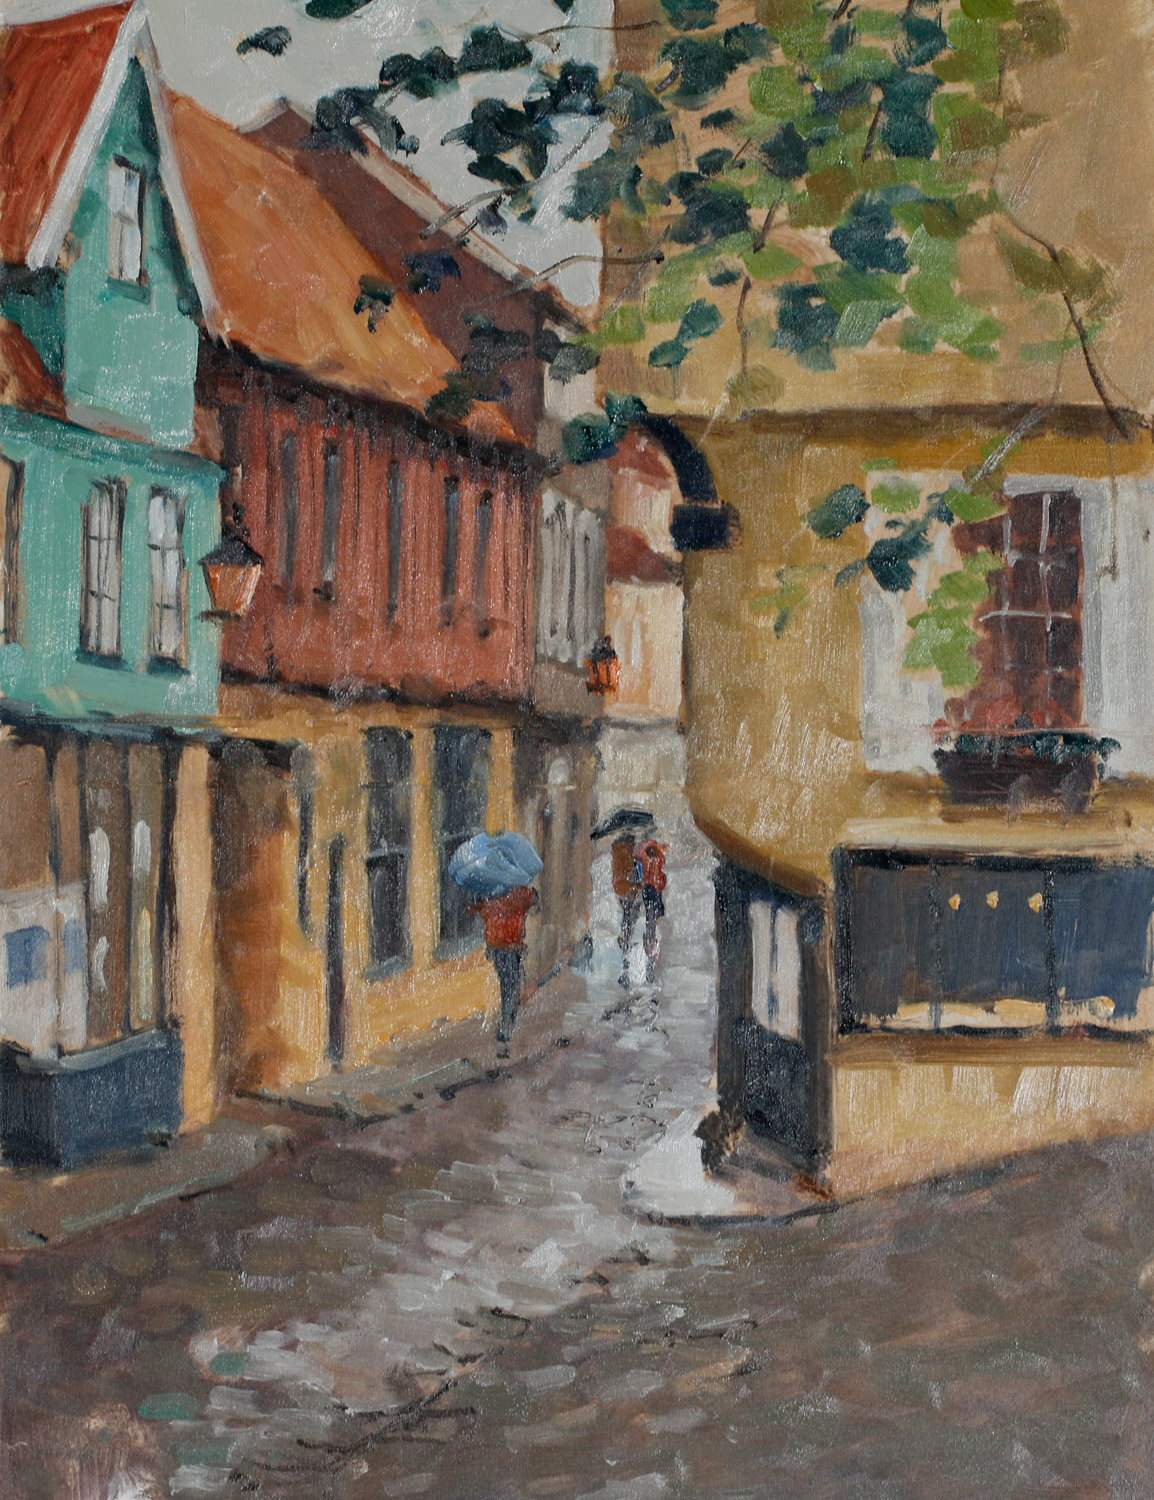 Artist Mo Teeuw - Rainy Day, Elm Hill, £390 12x12 Oil on Board at Paint Out Norwich 2015